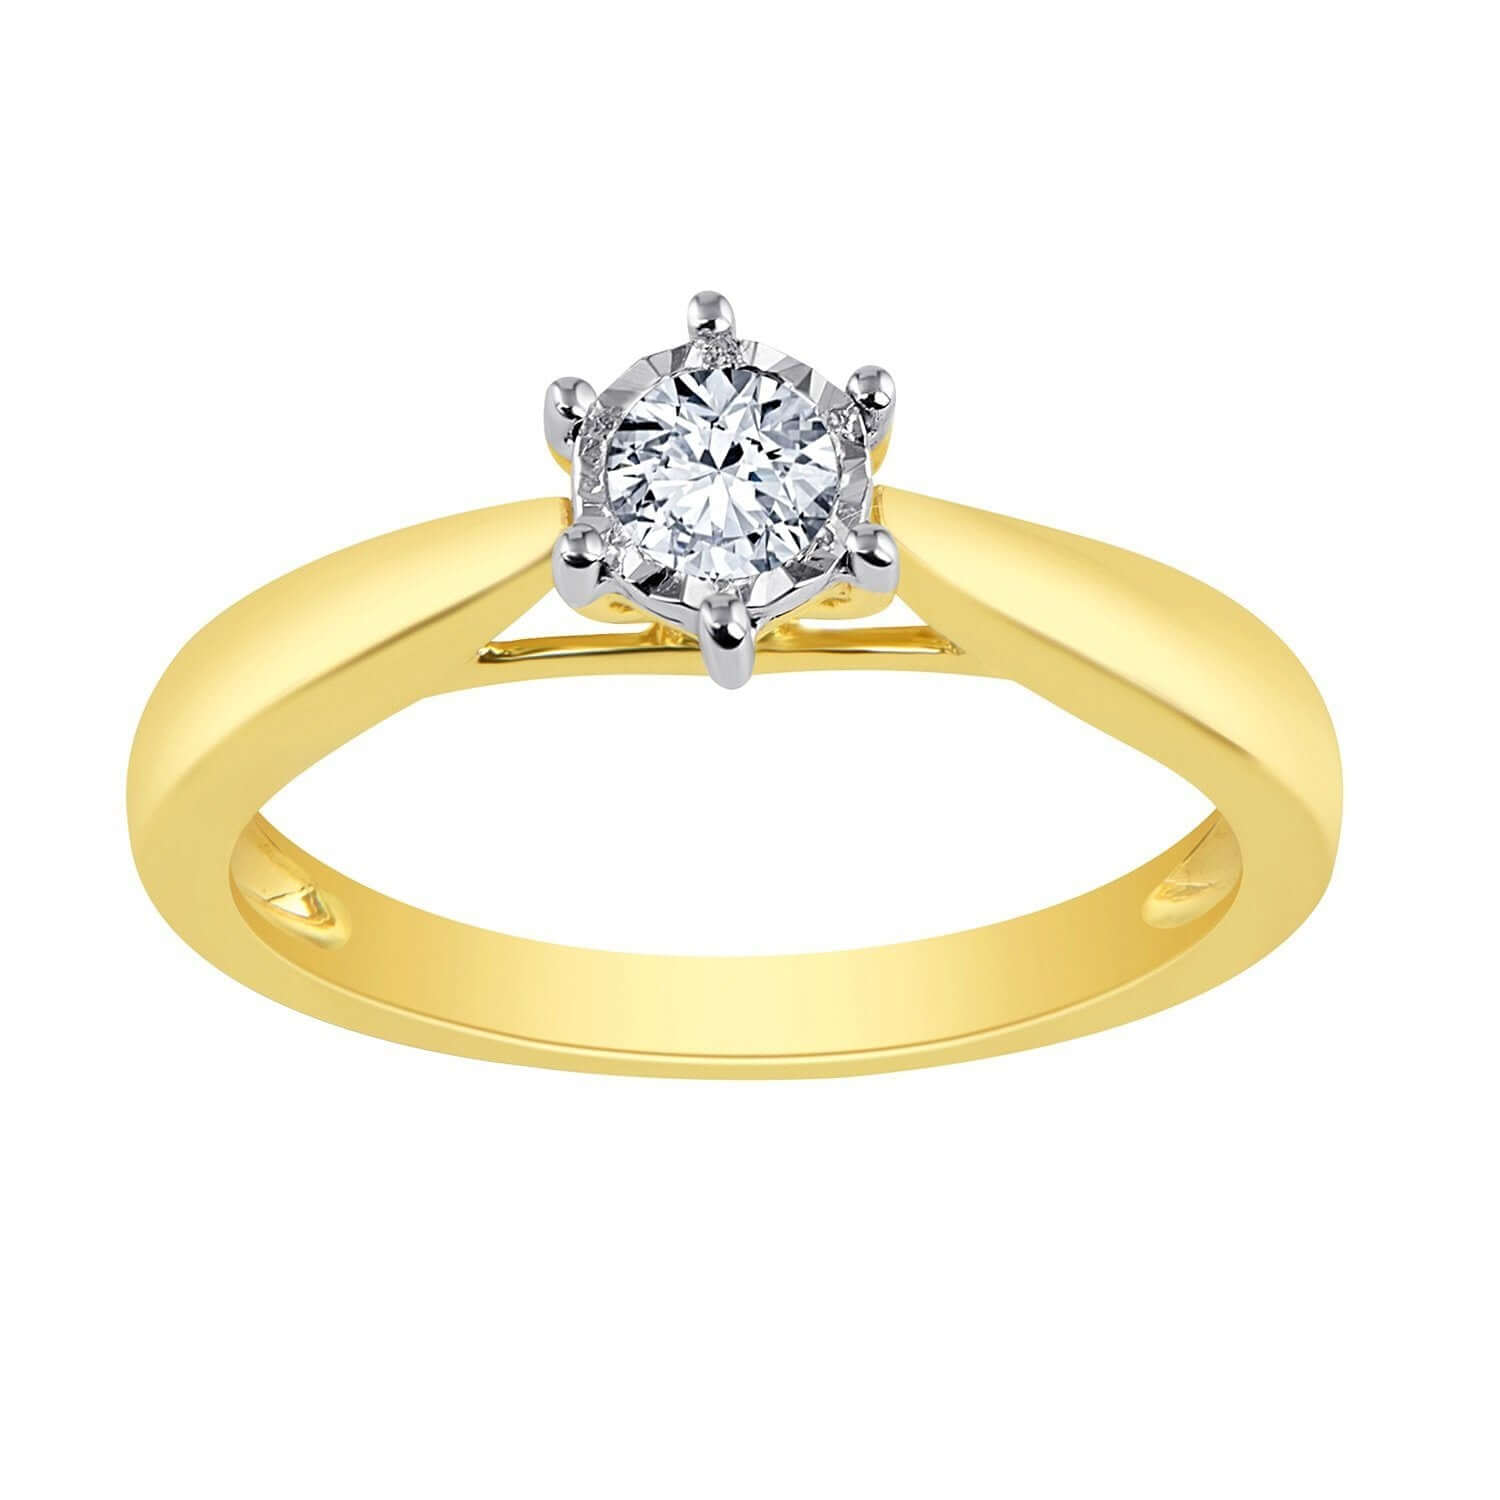 0.20ct Brilliant Solitaire Diamond Ring in 9ct Yellow Gold Rings Bevilles 